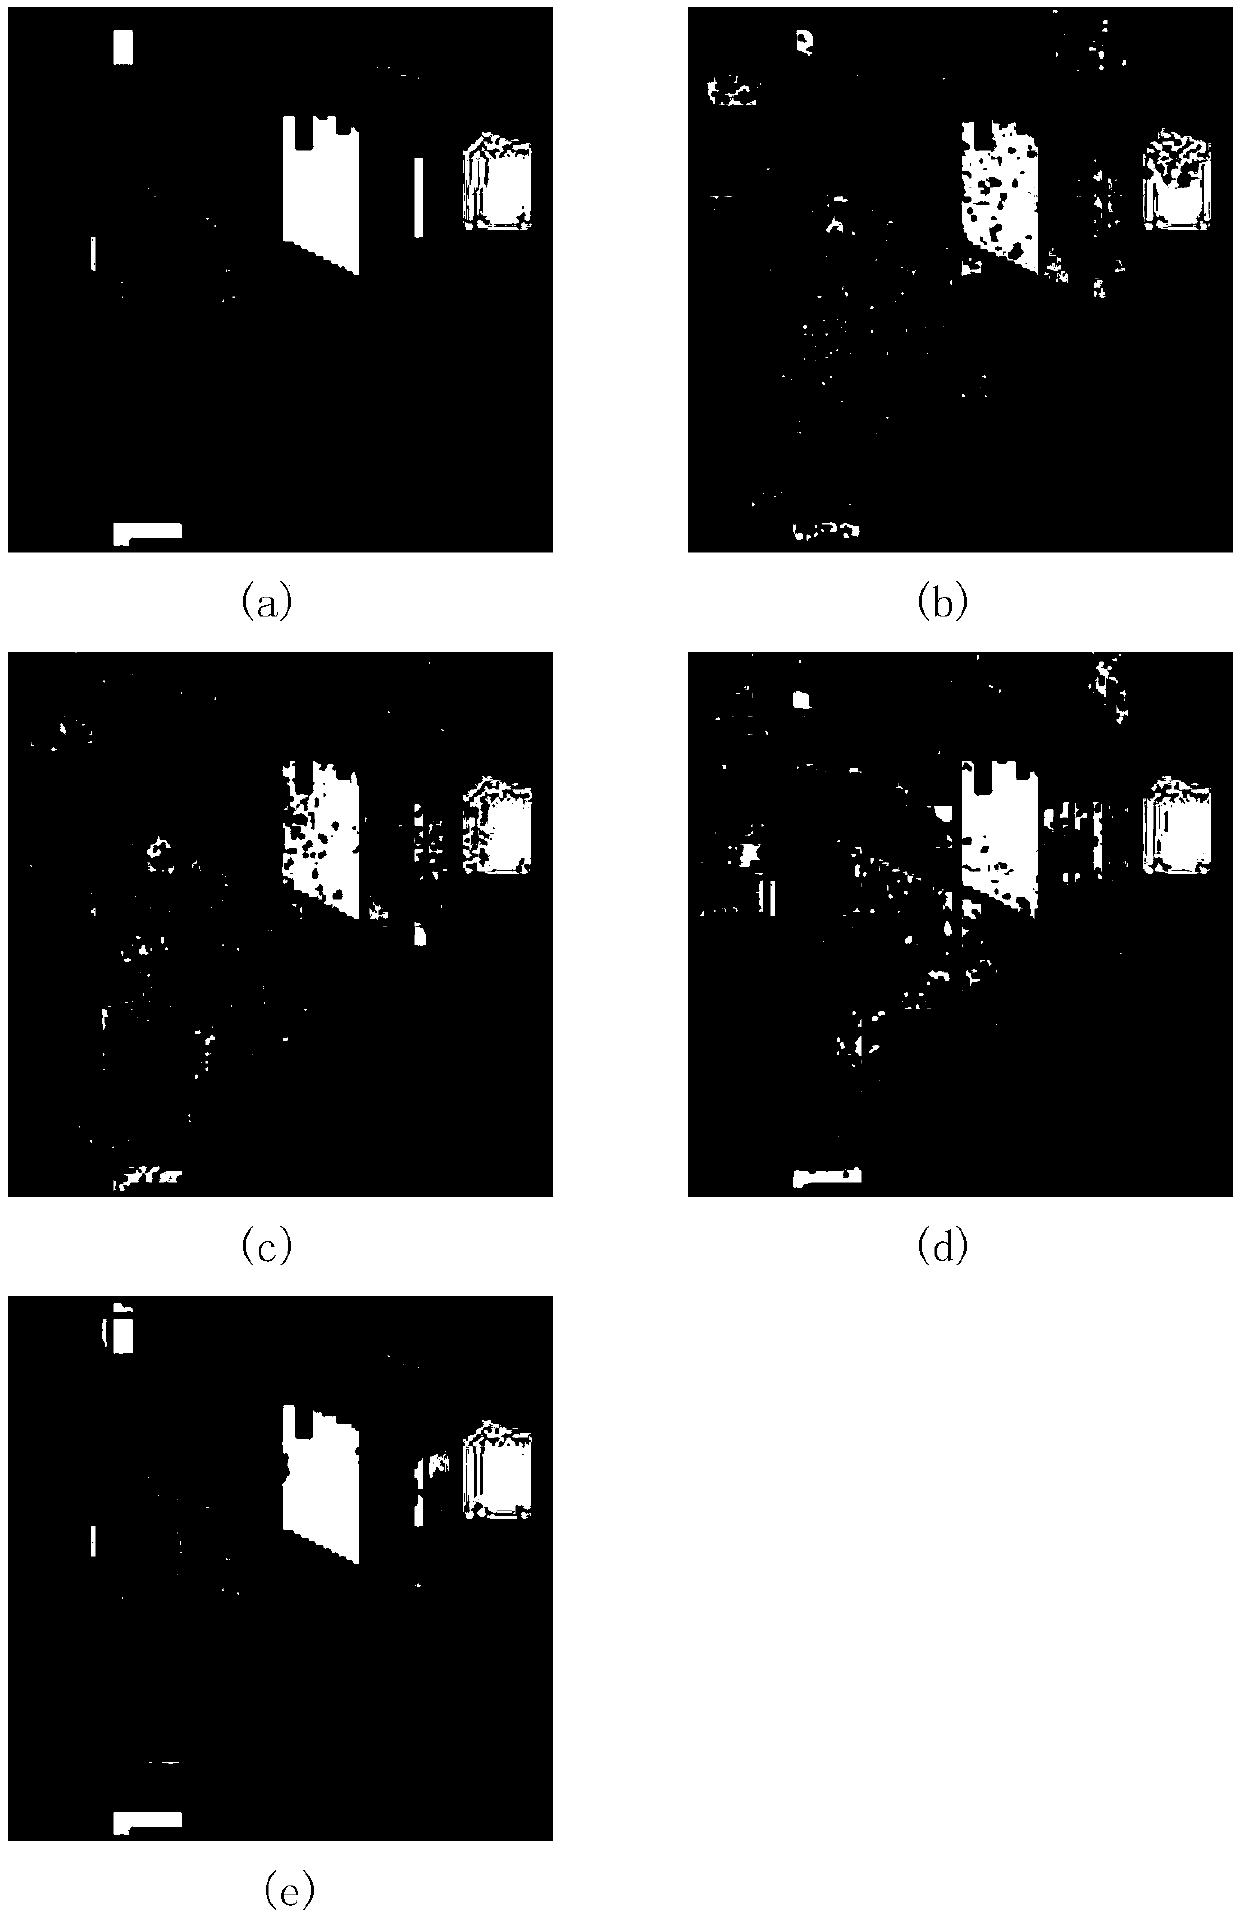 Hyperspectral image classification method based on multiclass generative adversarial network